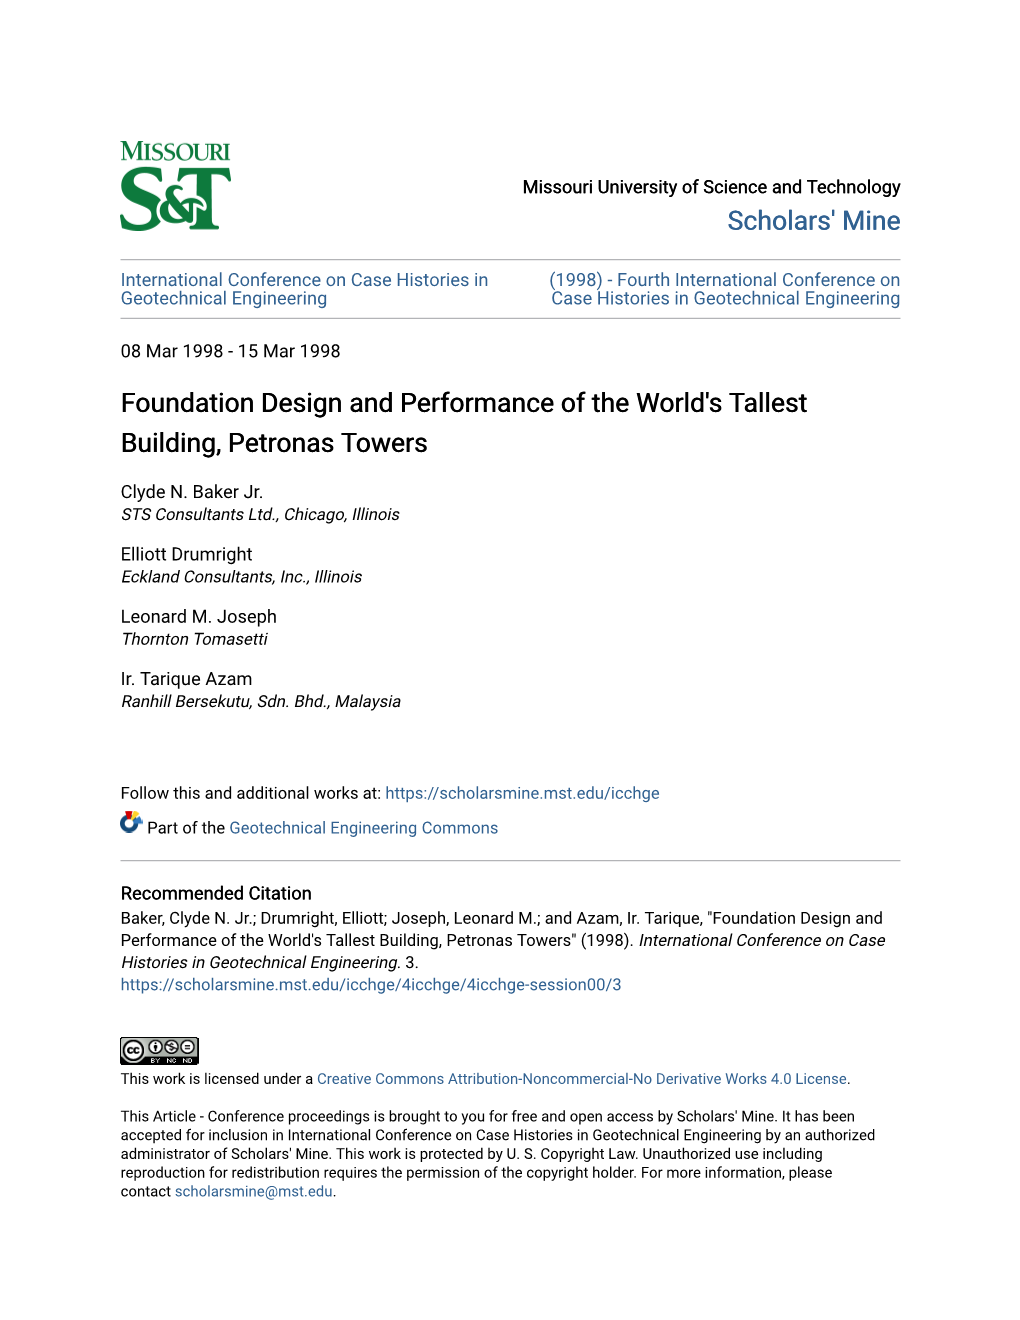 Foundation Design and Performance of the World's Tallest Building, Petronas Towers